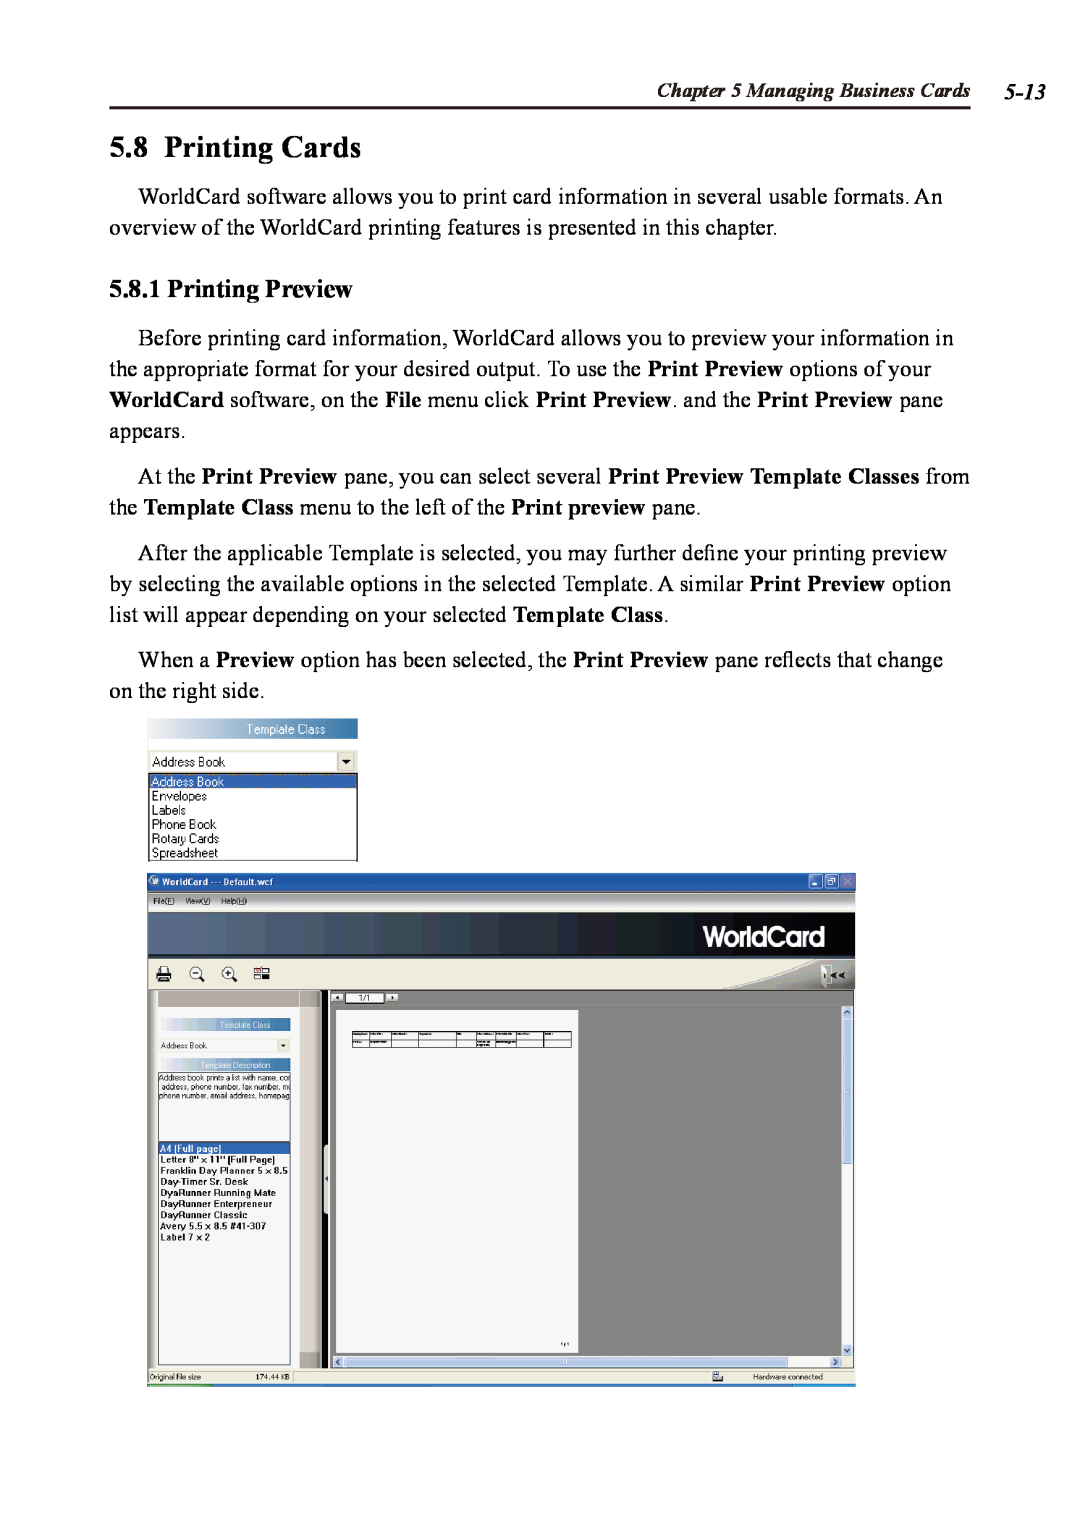 Penpower duet 2 user manual Printing Cards, Printing Preview, 5-13 